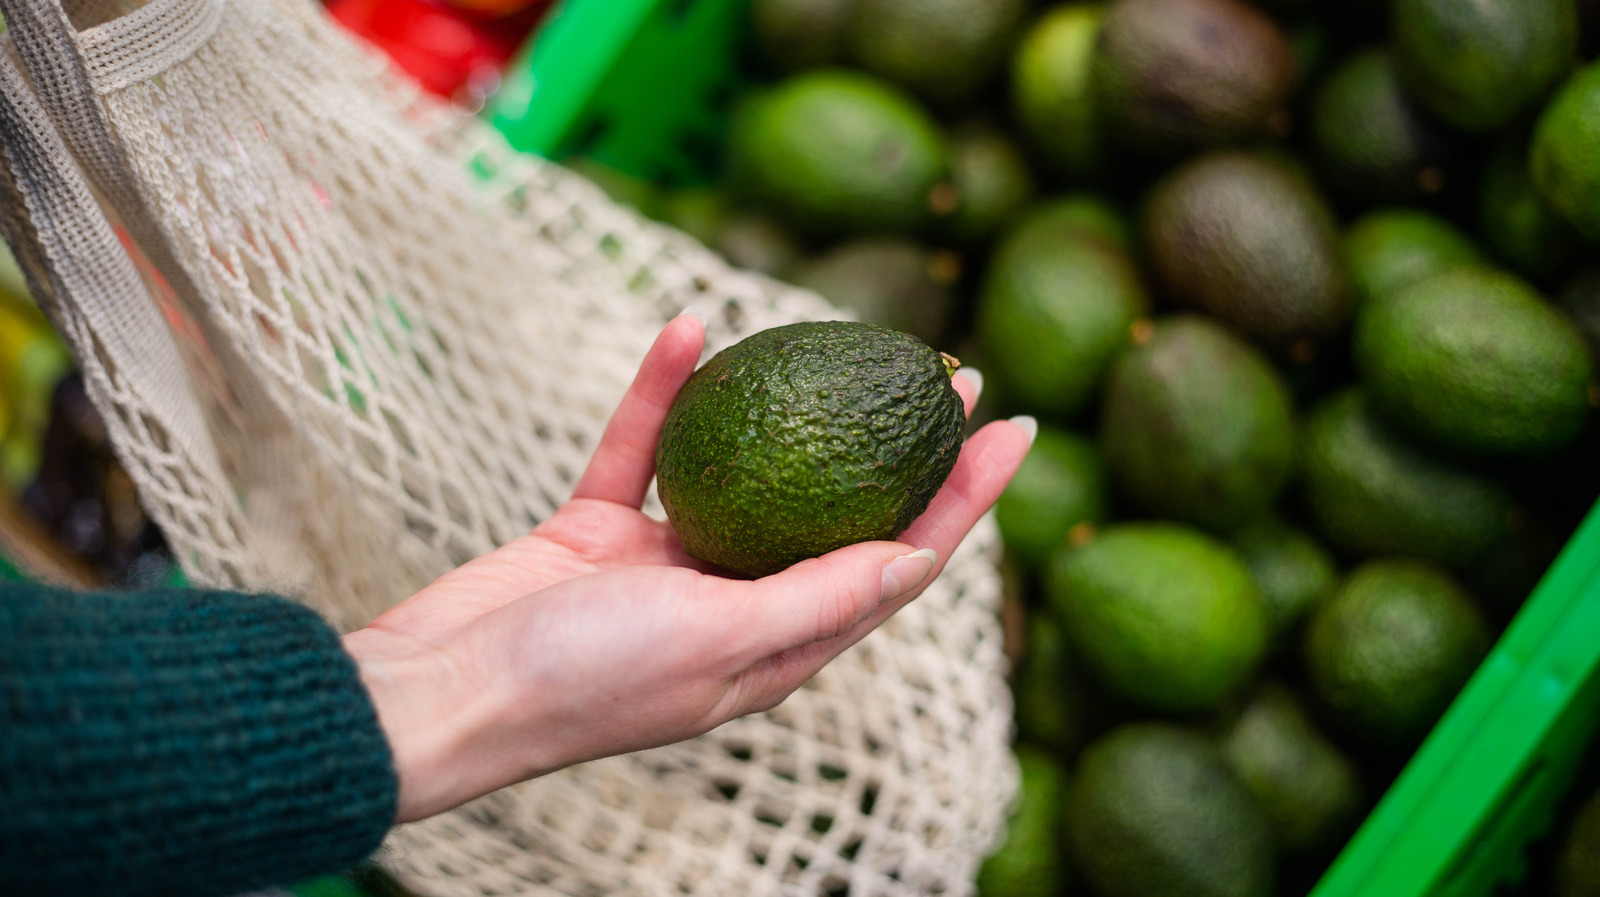 Mexican Avocados Bound For The US Get Police Escort Ahead Of Super Bowl – Tasting Table